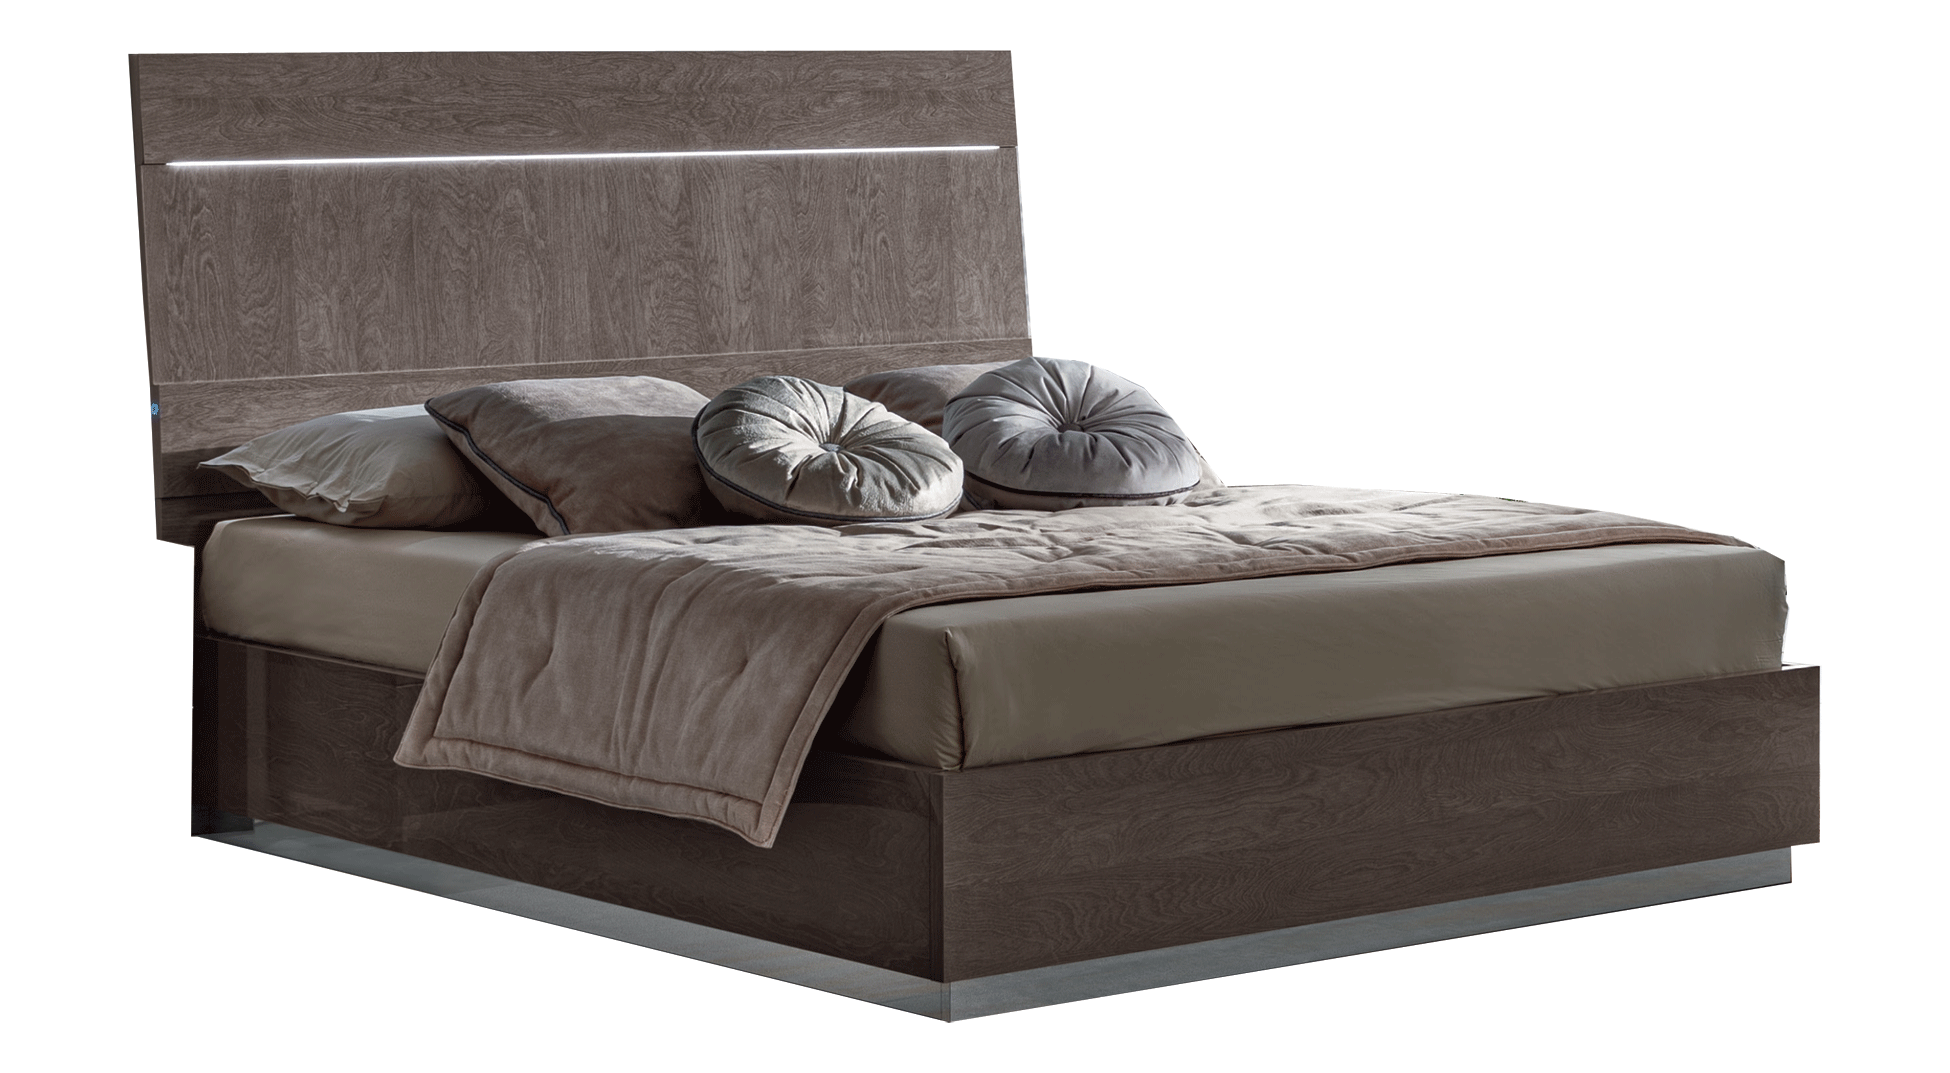 Brands Arredoclassic Bedroom, Italy Kroma SILVER Bed